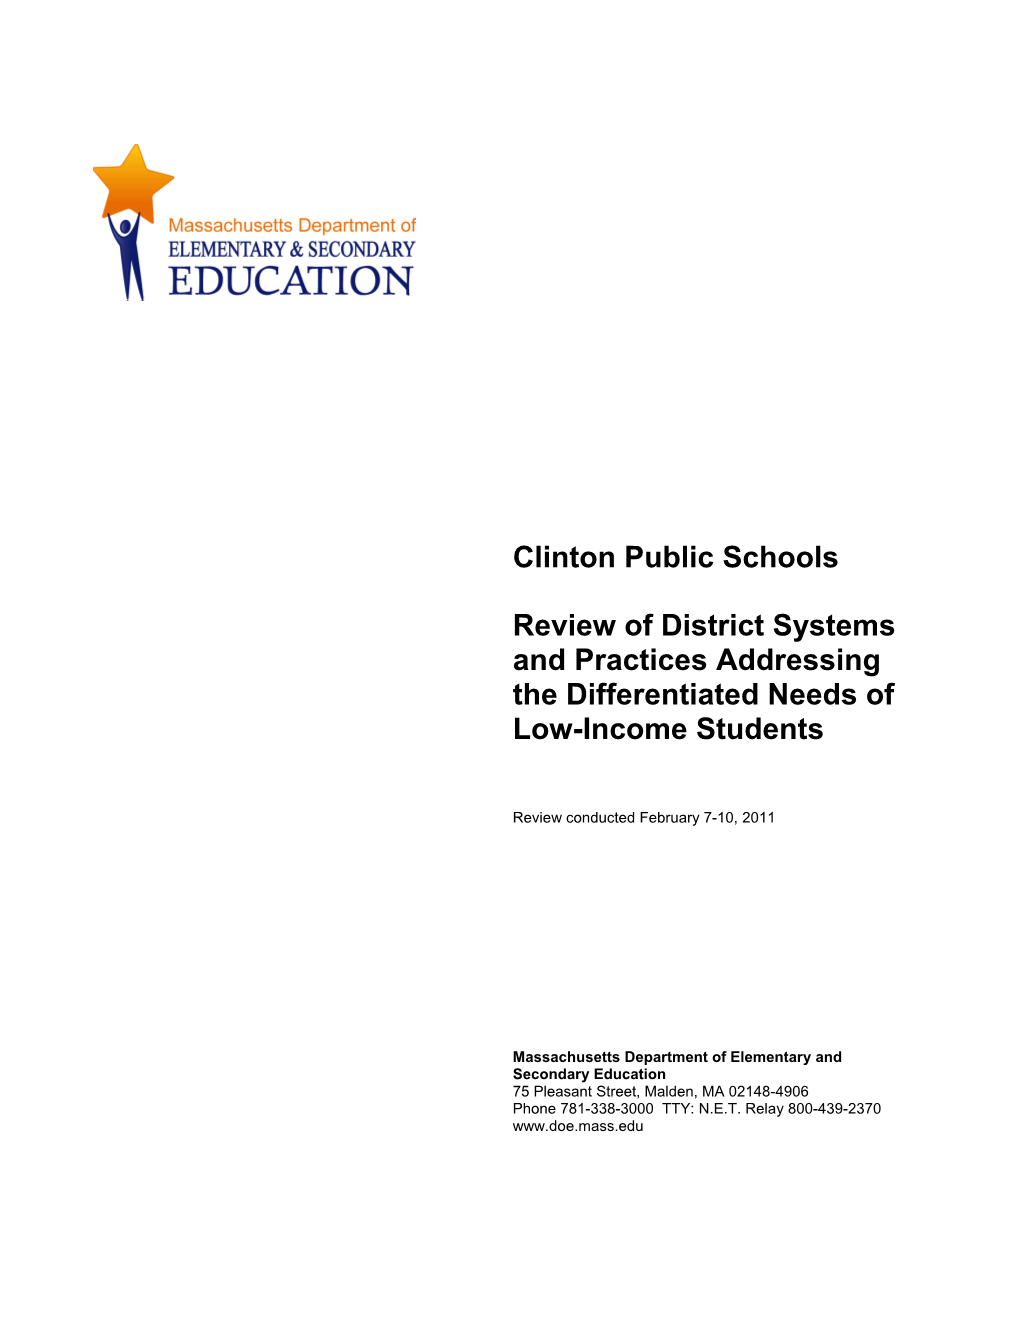 Clinton Differentiated Needs (Low-Income) Review Report, 2011 Onsite